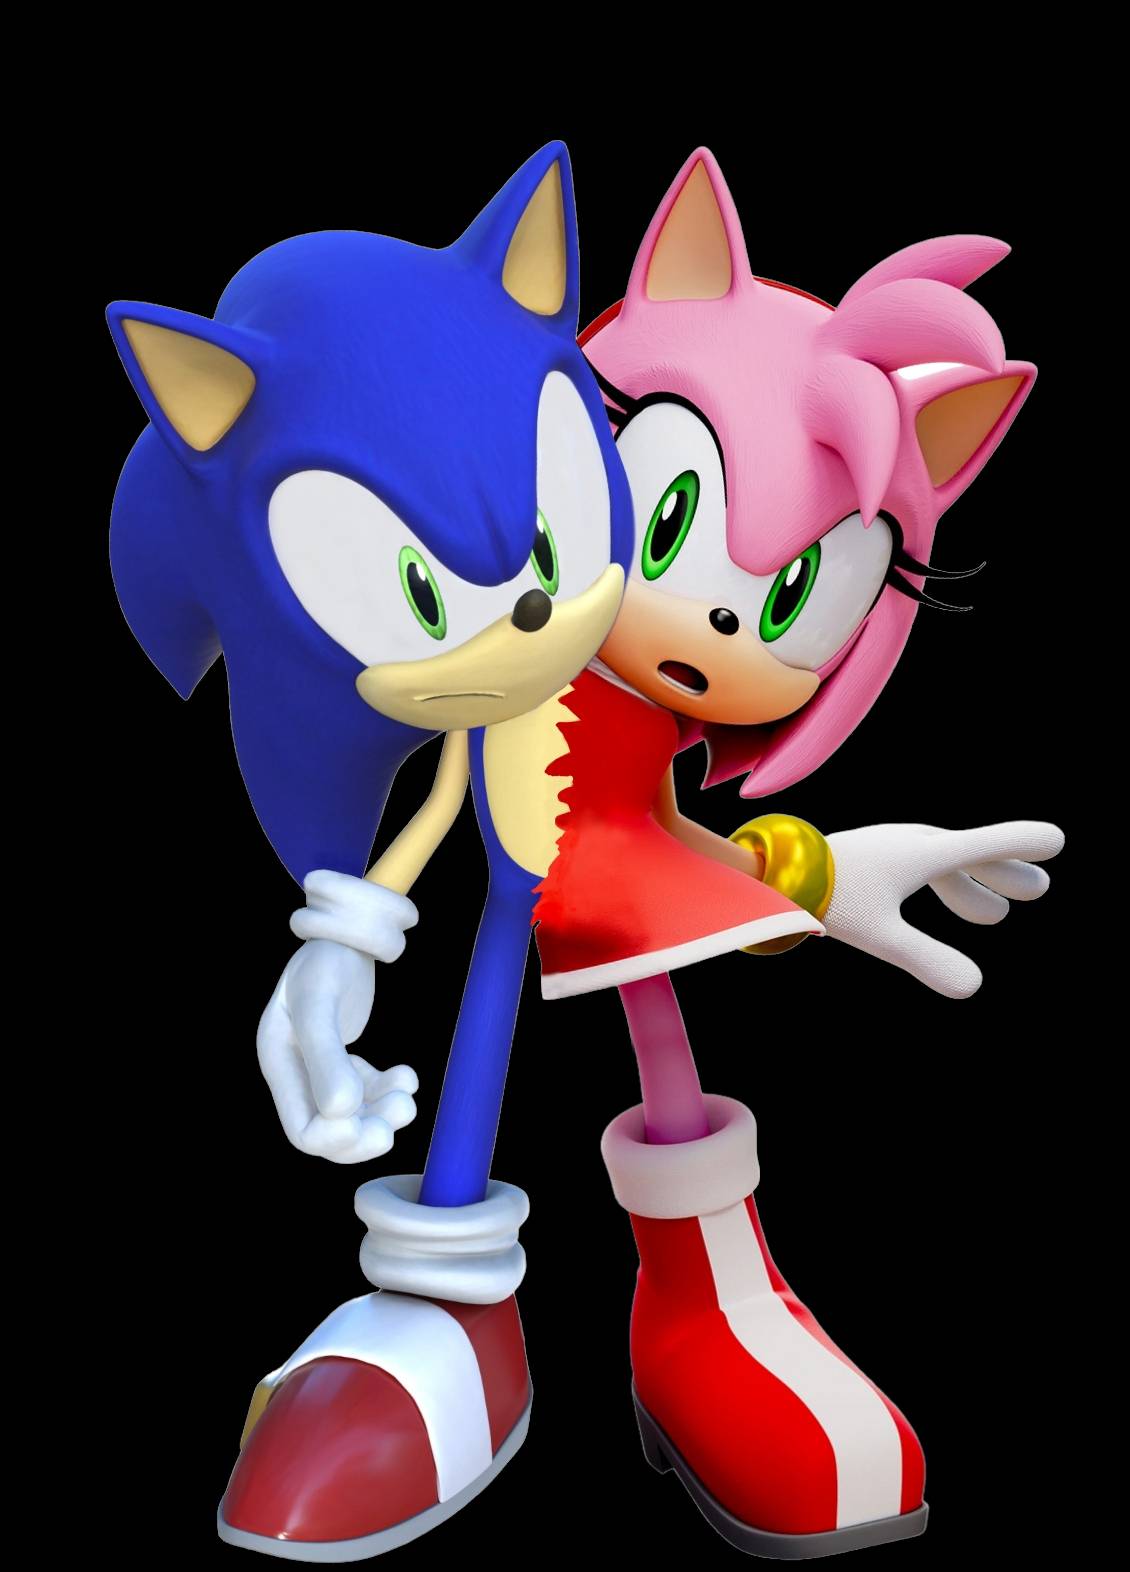 Sonic And Amy Forever by Conjoined-RainMaker on DeviantArt